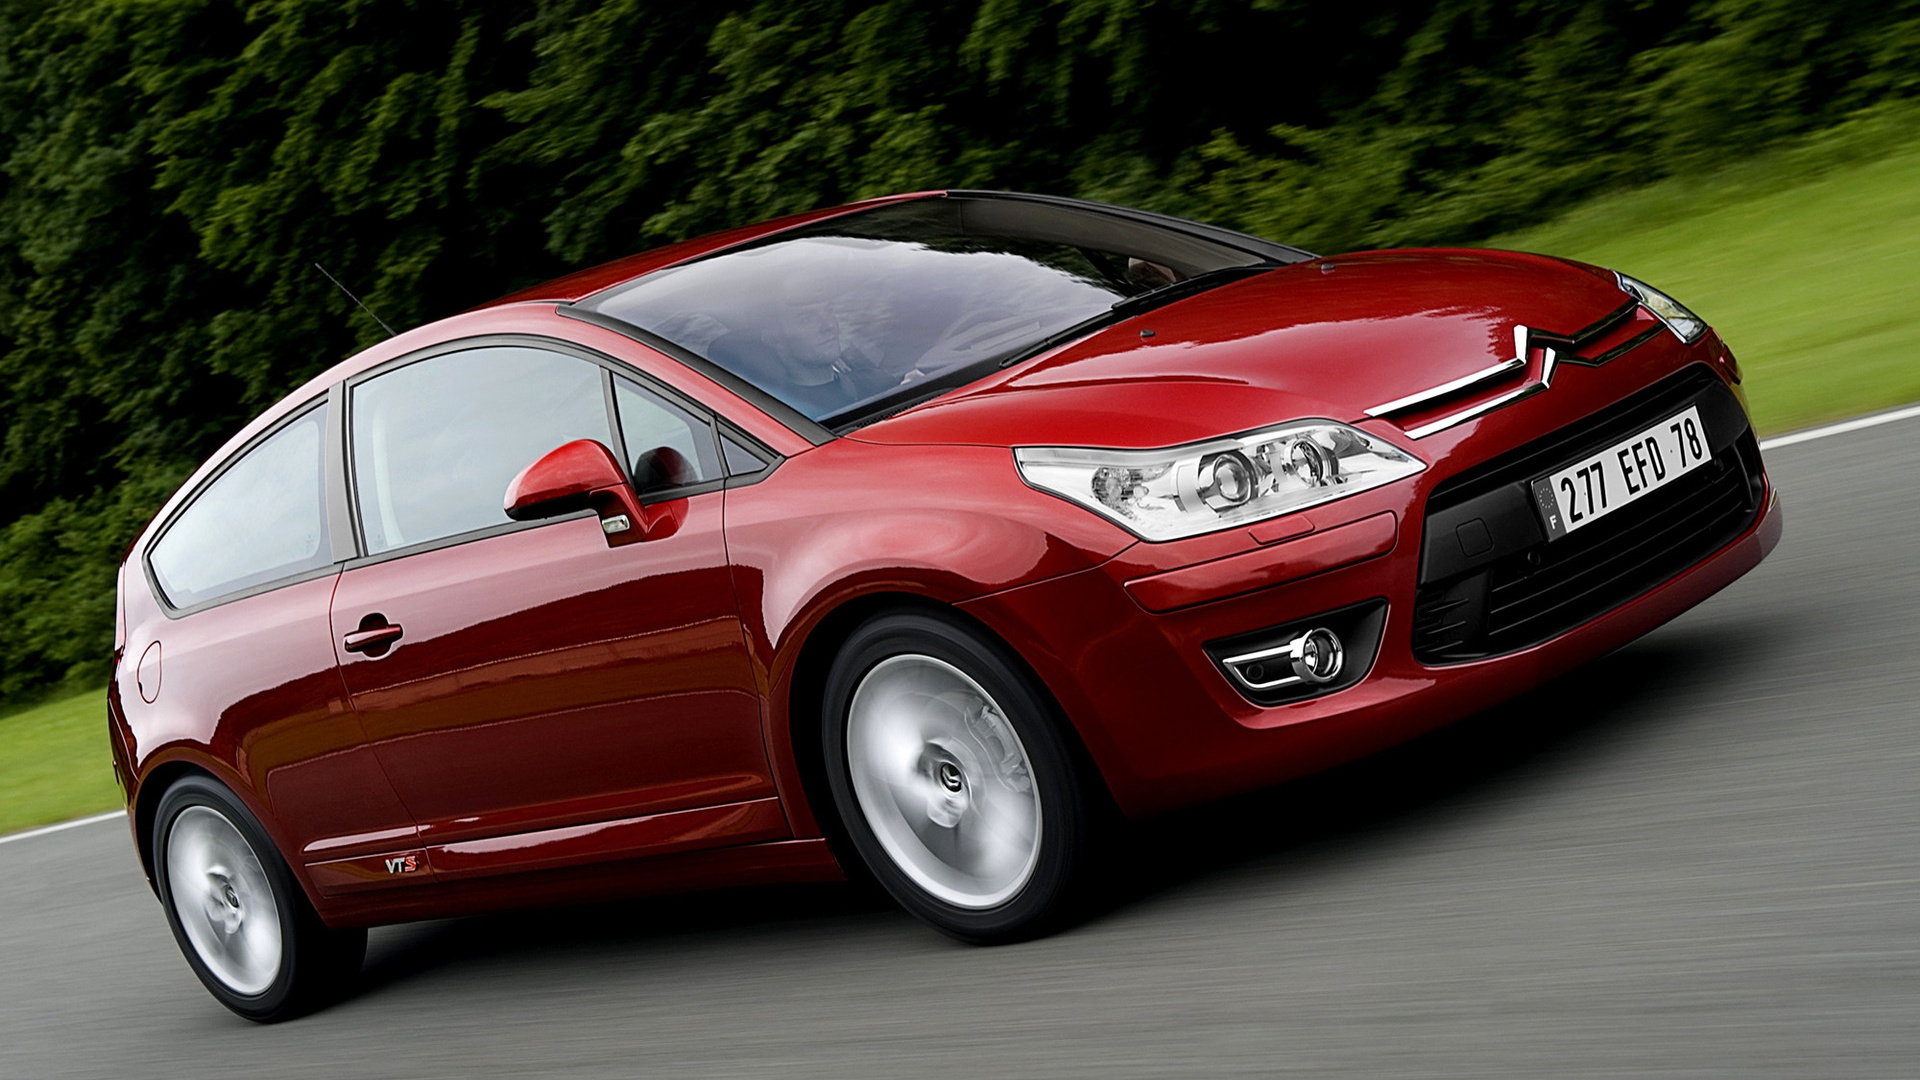 Citroen C4, VTS power, Sleek and stylish, Stand out from the crowd, 1920x1080 Full HD Desktop